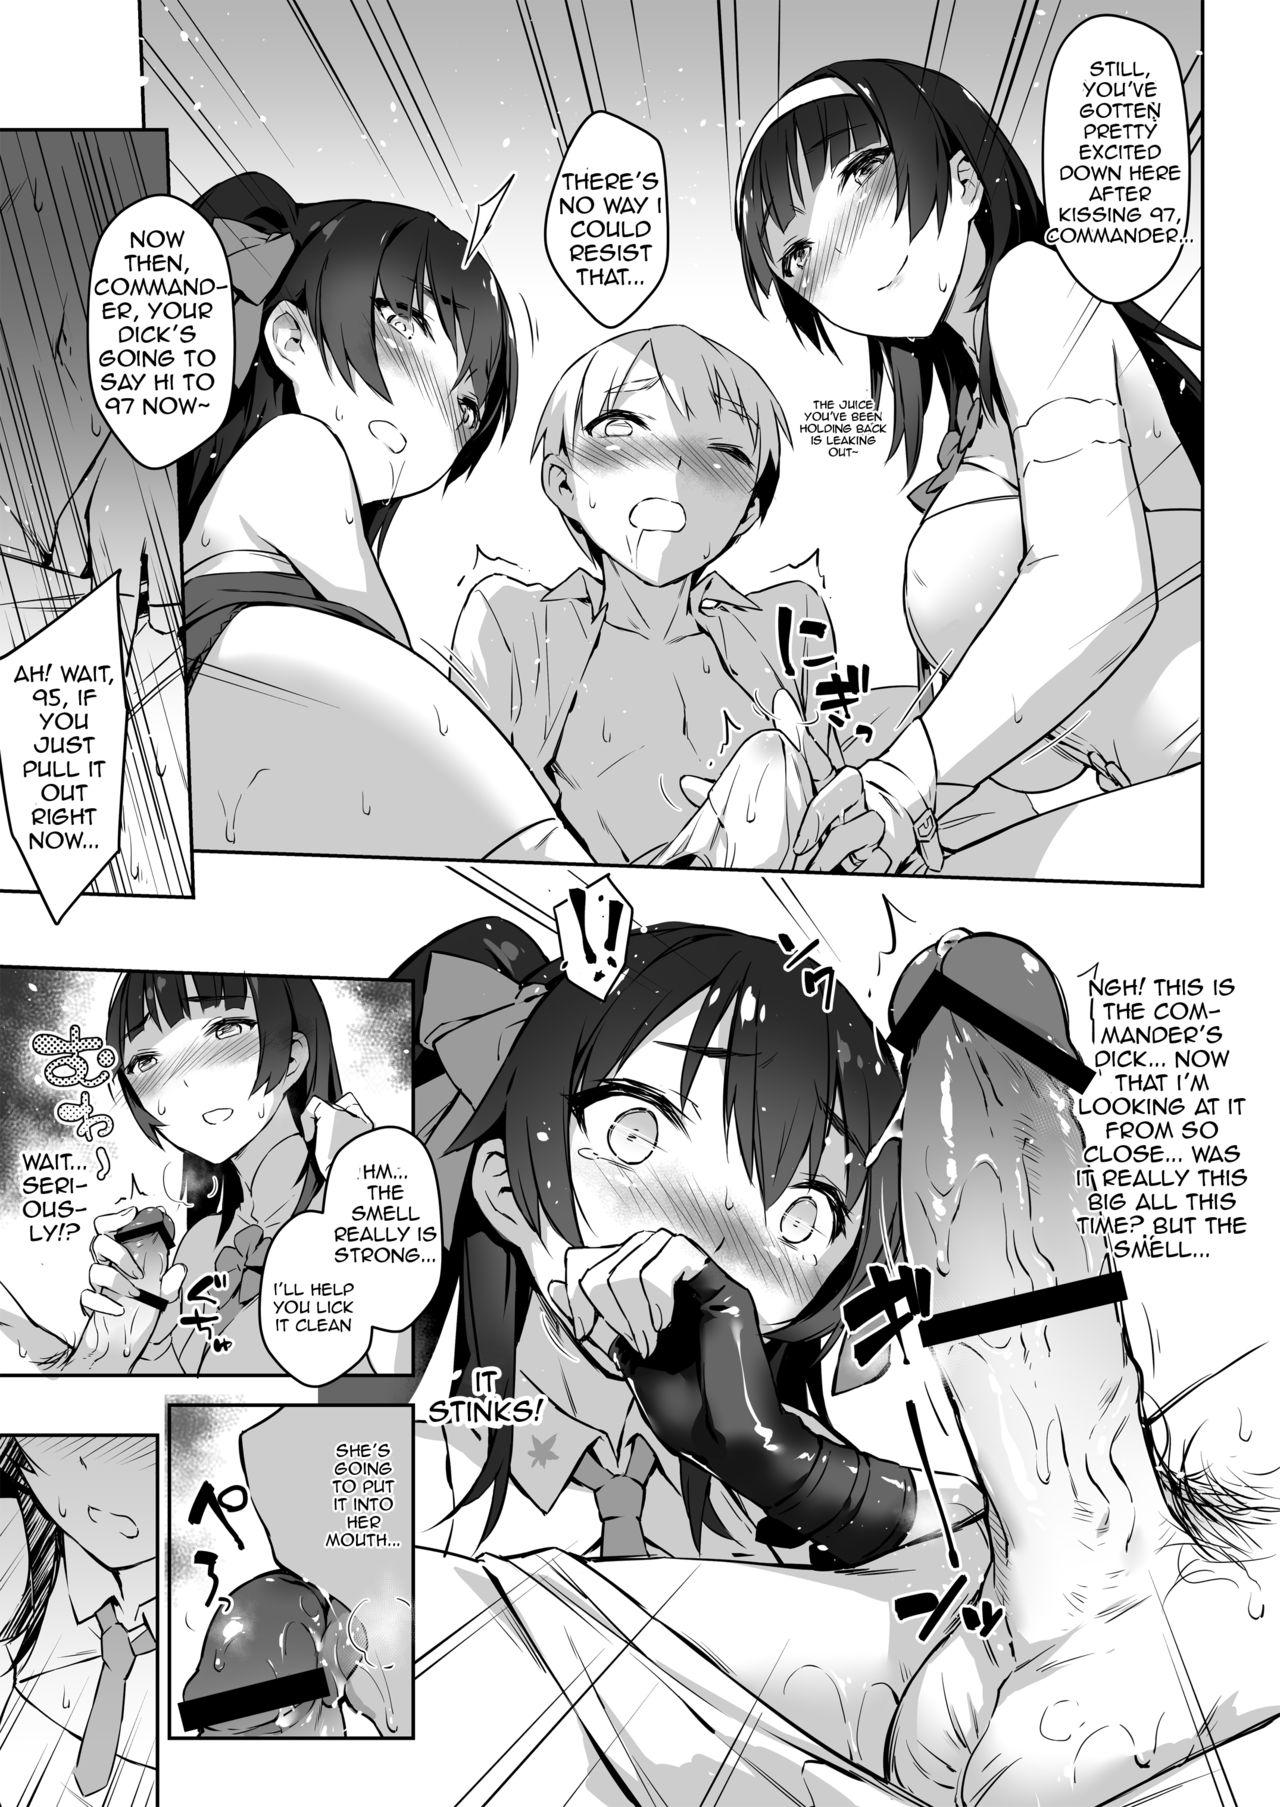 Wild Type 95 Type 97, Let Your Big Sister Teach You! - Girls frontline Cheerleader - Page 11